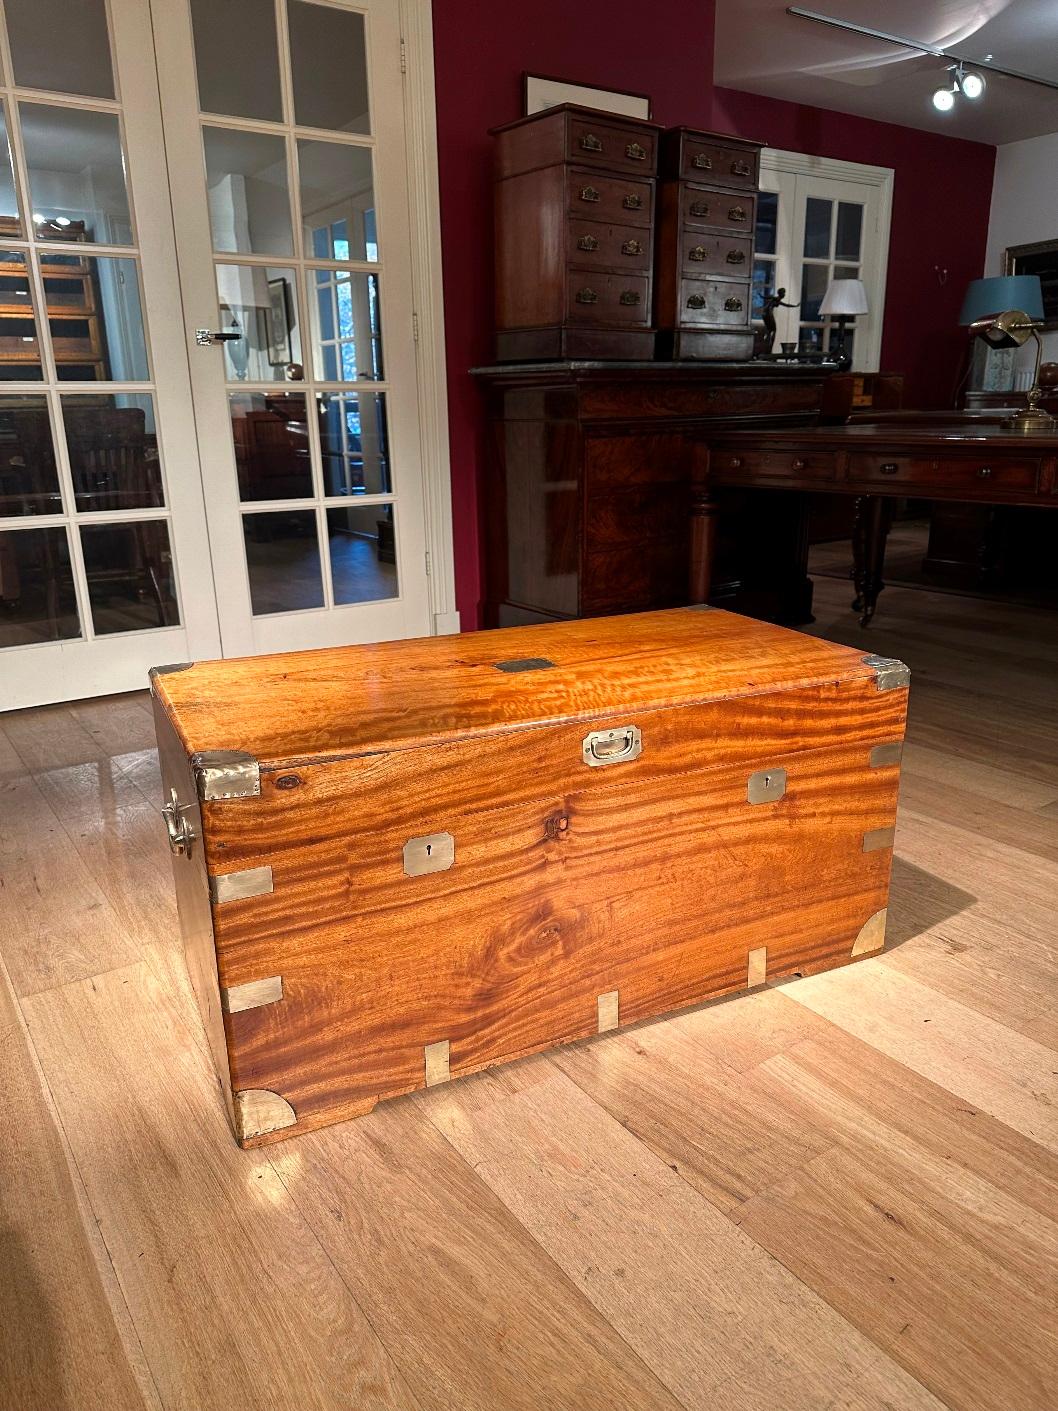 Beautiful camphor wood box. beautiful light warm color. Entirely in perfect condition. Can be used as a coffee table, bench behind the bed.
In the 18th and 19th centuries, camphor chests were used to transport tea, silk and porcelain from China to